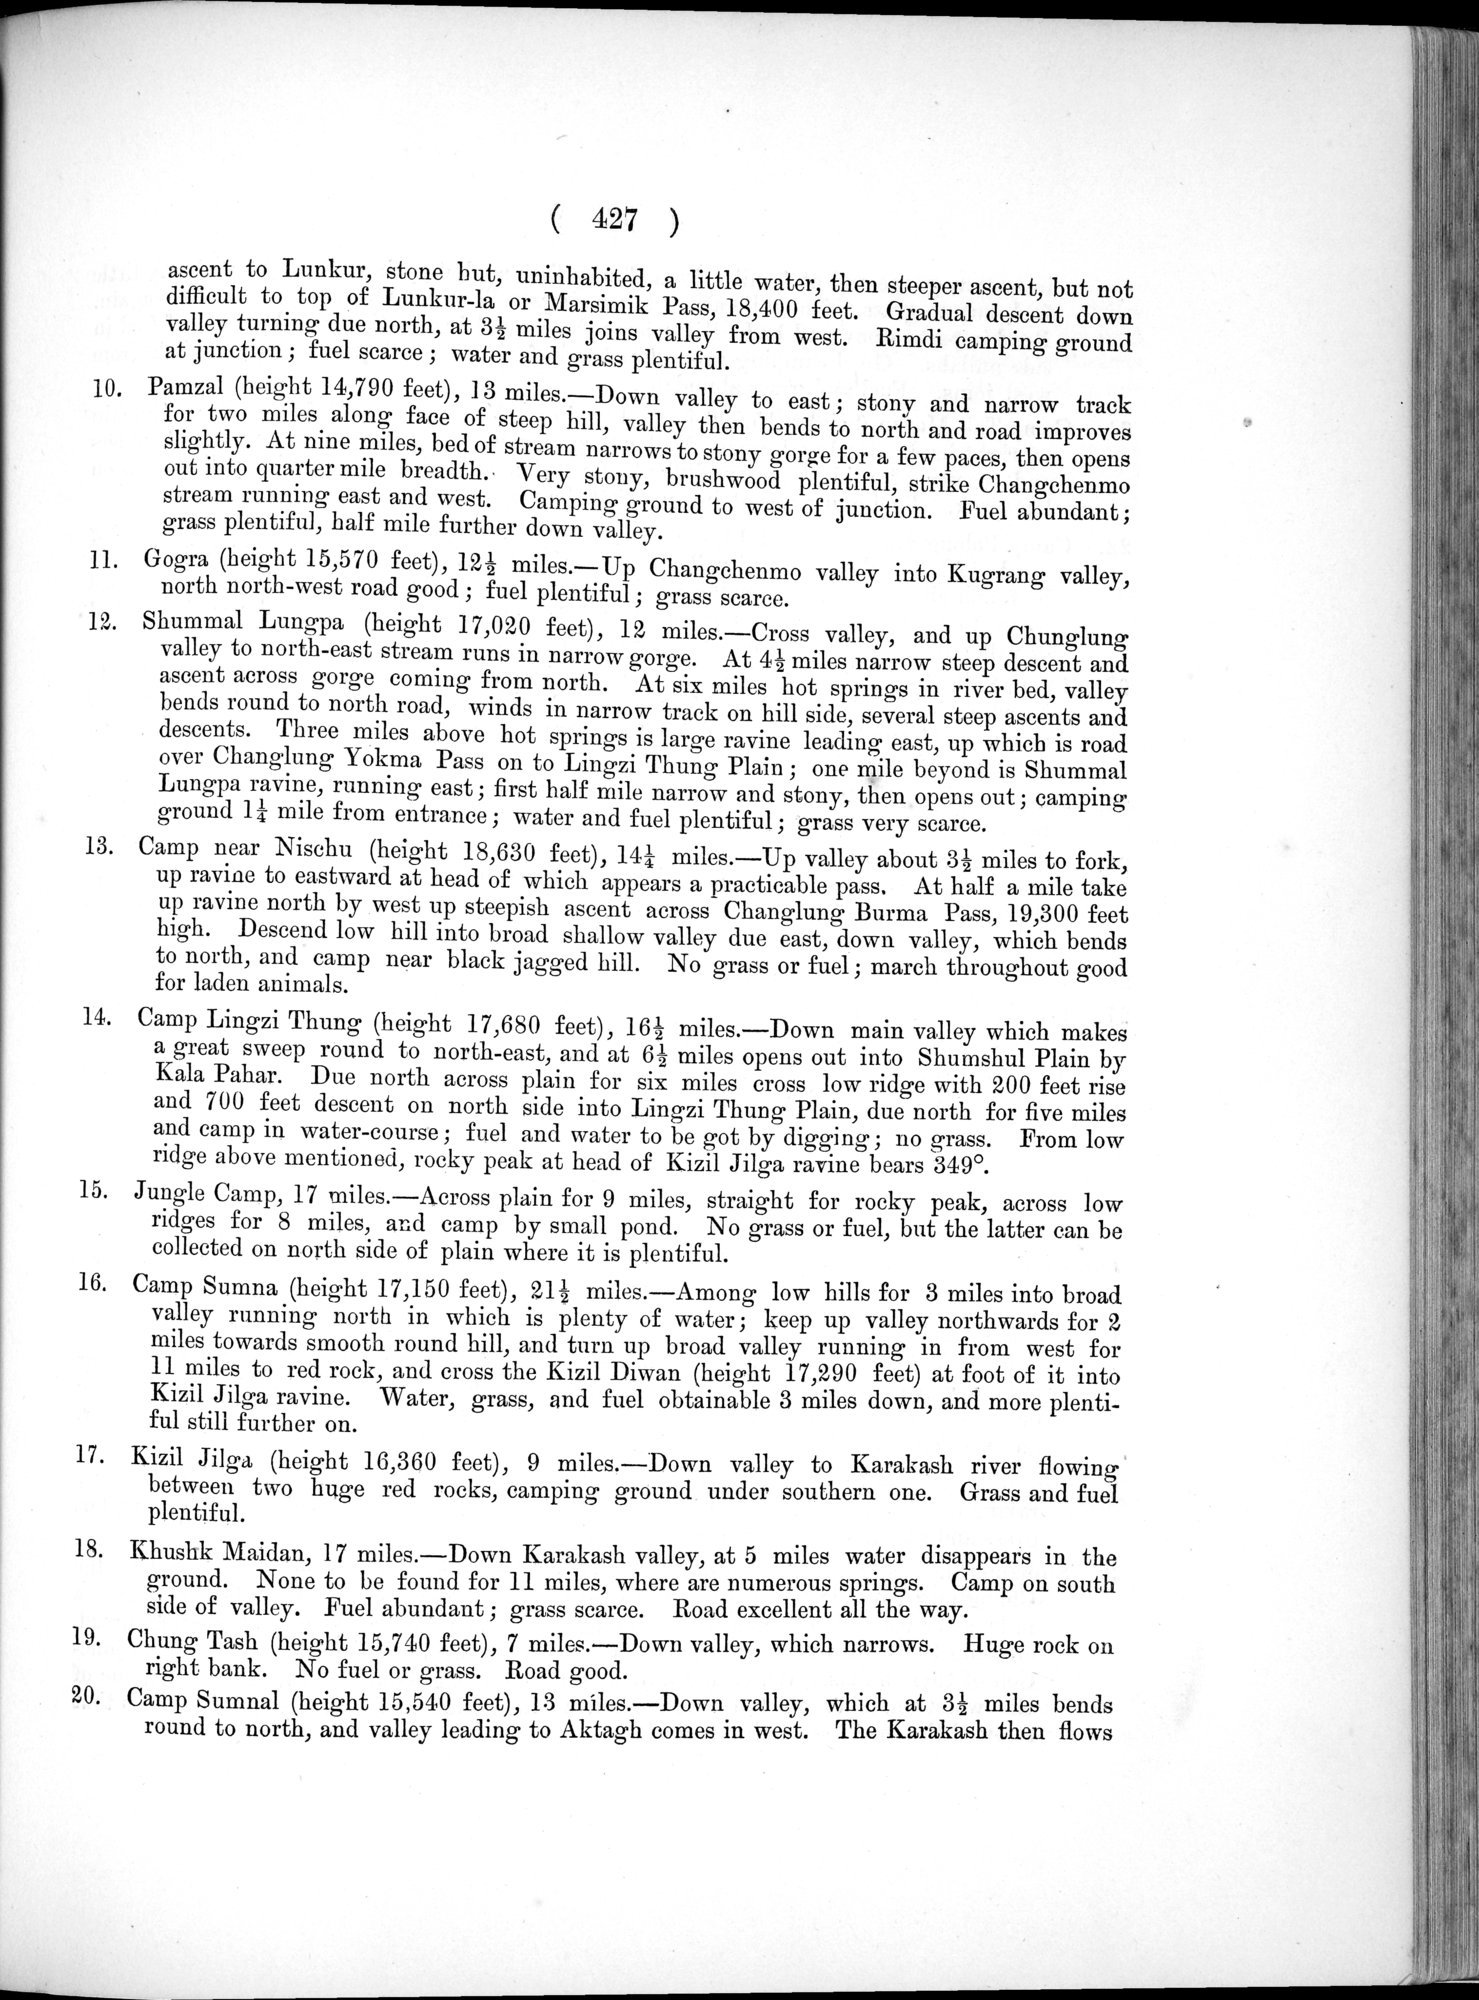 Report of a Mission to Yarkund in 1873 : vol.1 / Page 561 (Grayscale High Resolution Image)